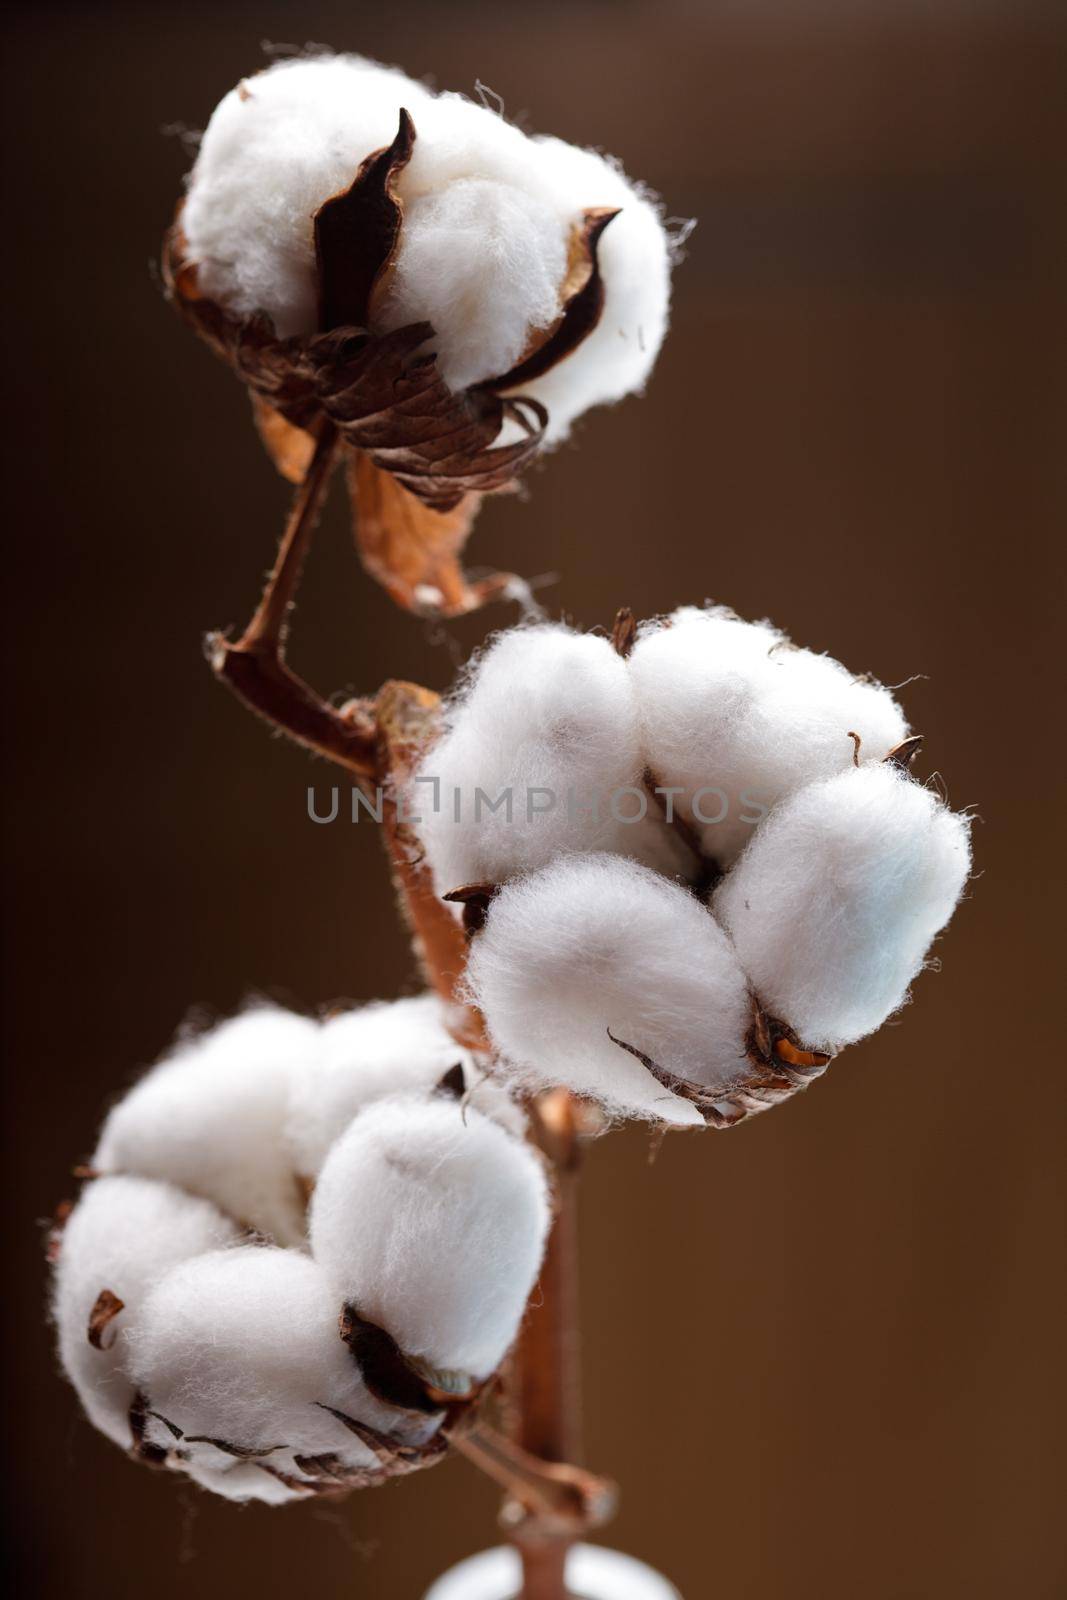 Cotton flower close up on brown background